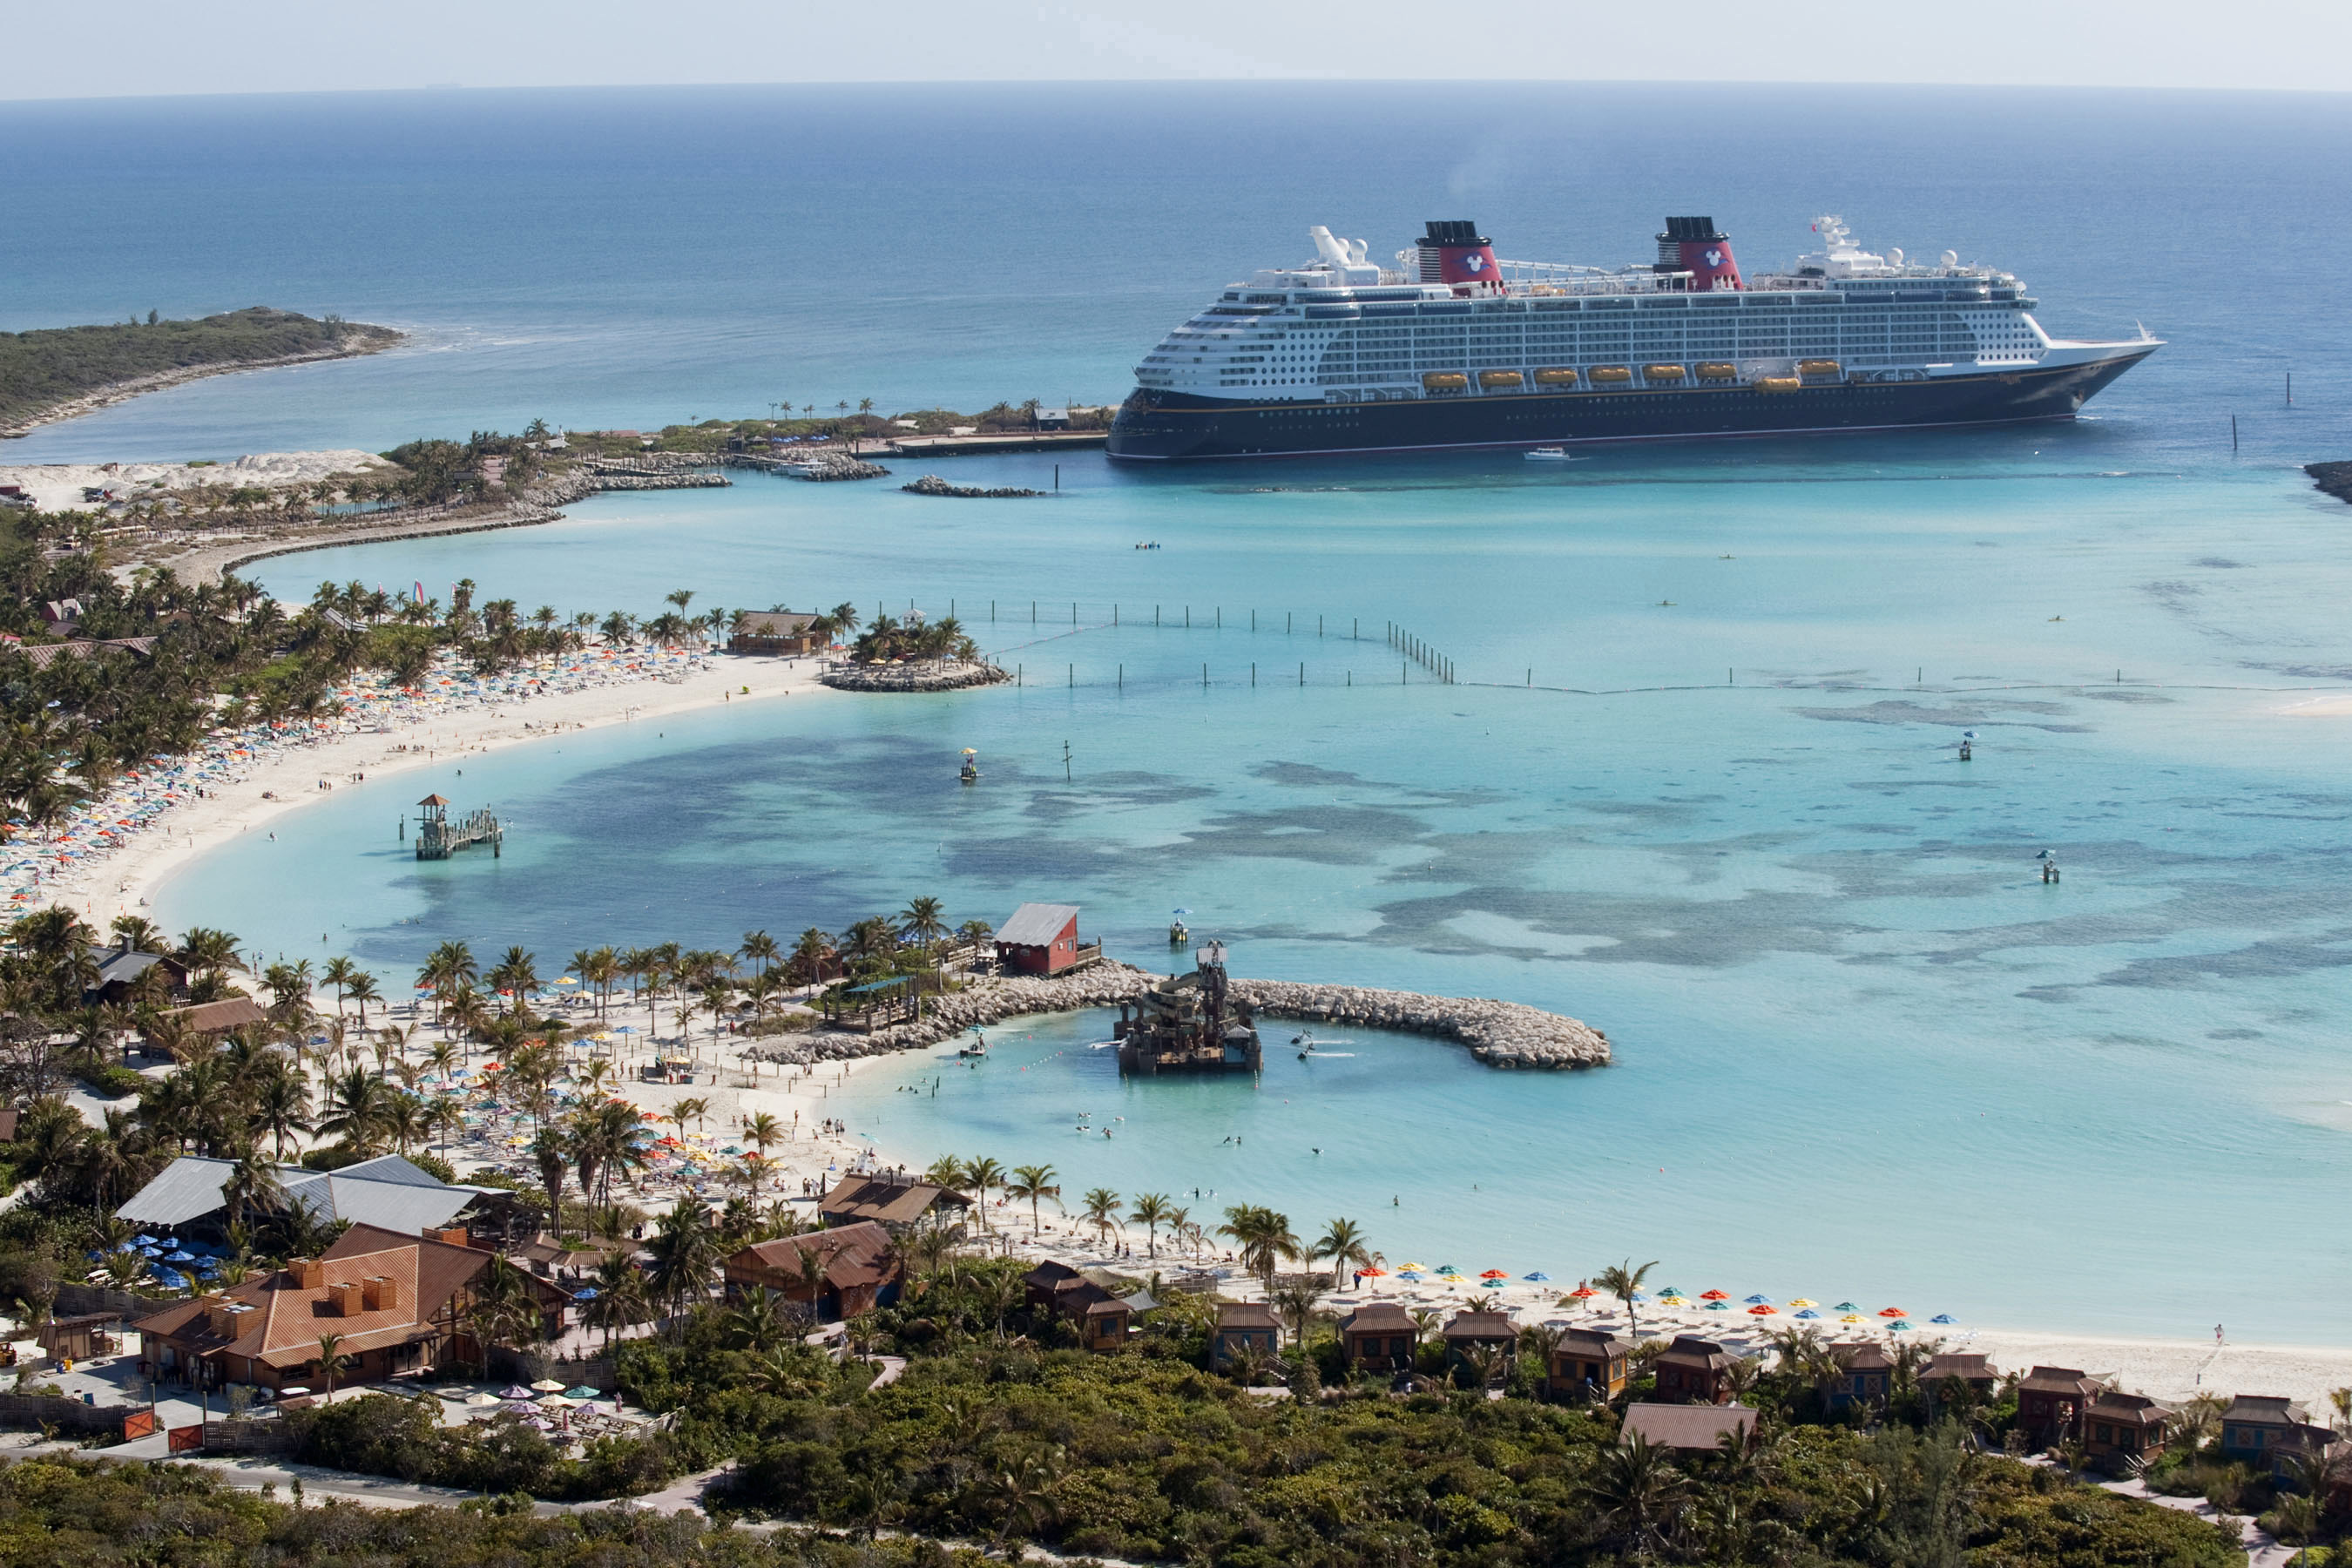 Disney Cruise Line will offer sailings in summer 2021 to Castaway cay